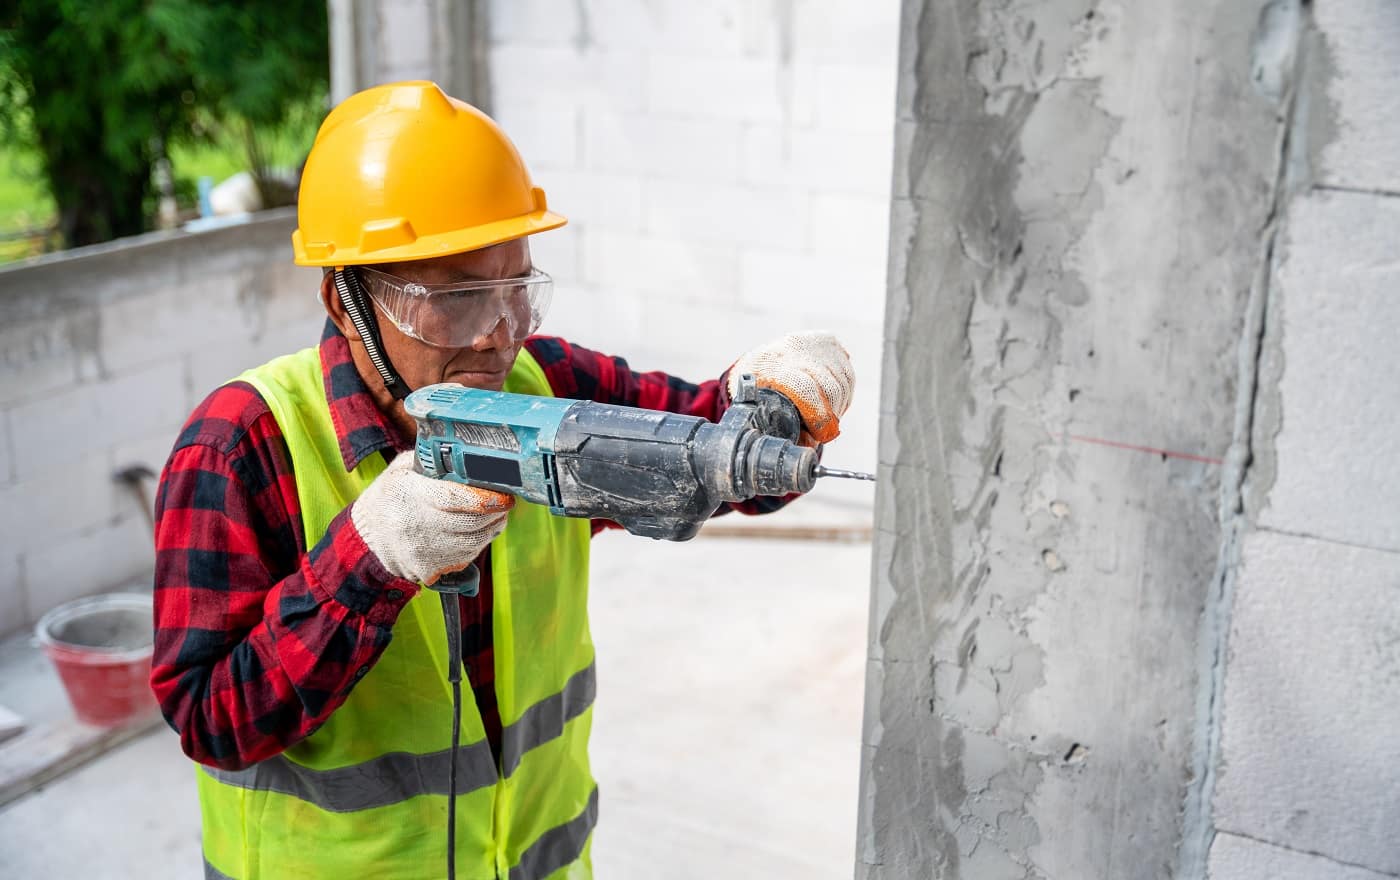 tiler using electric impact drill to drilling cement wall at unfinished house construction